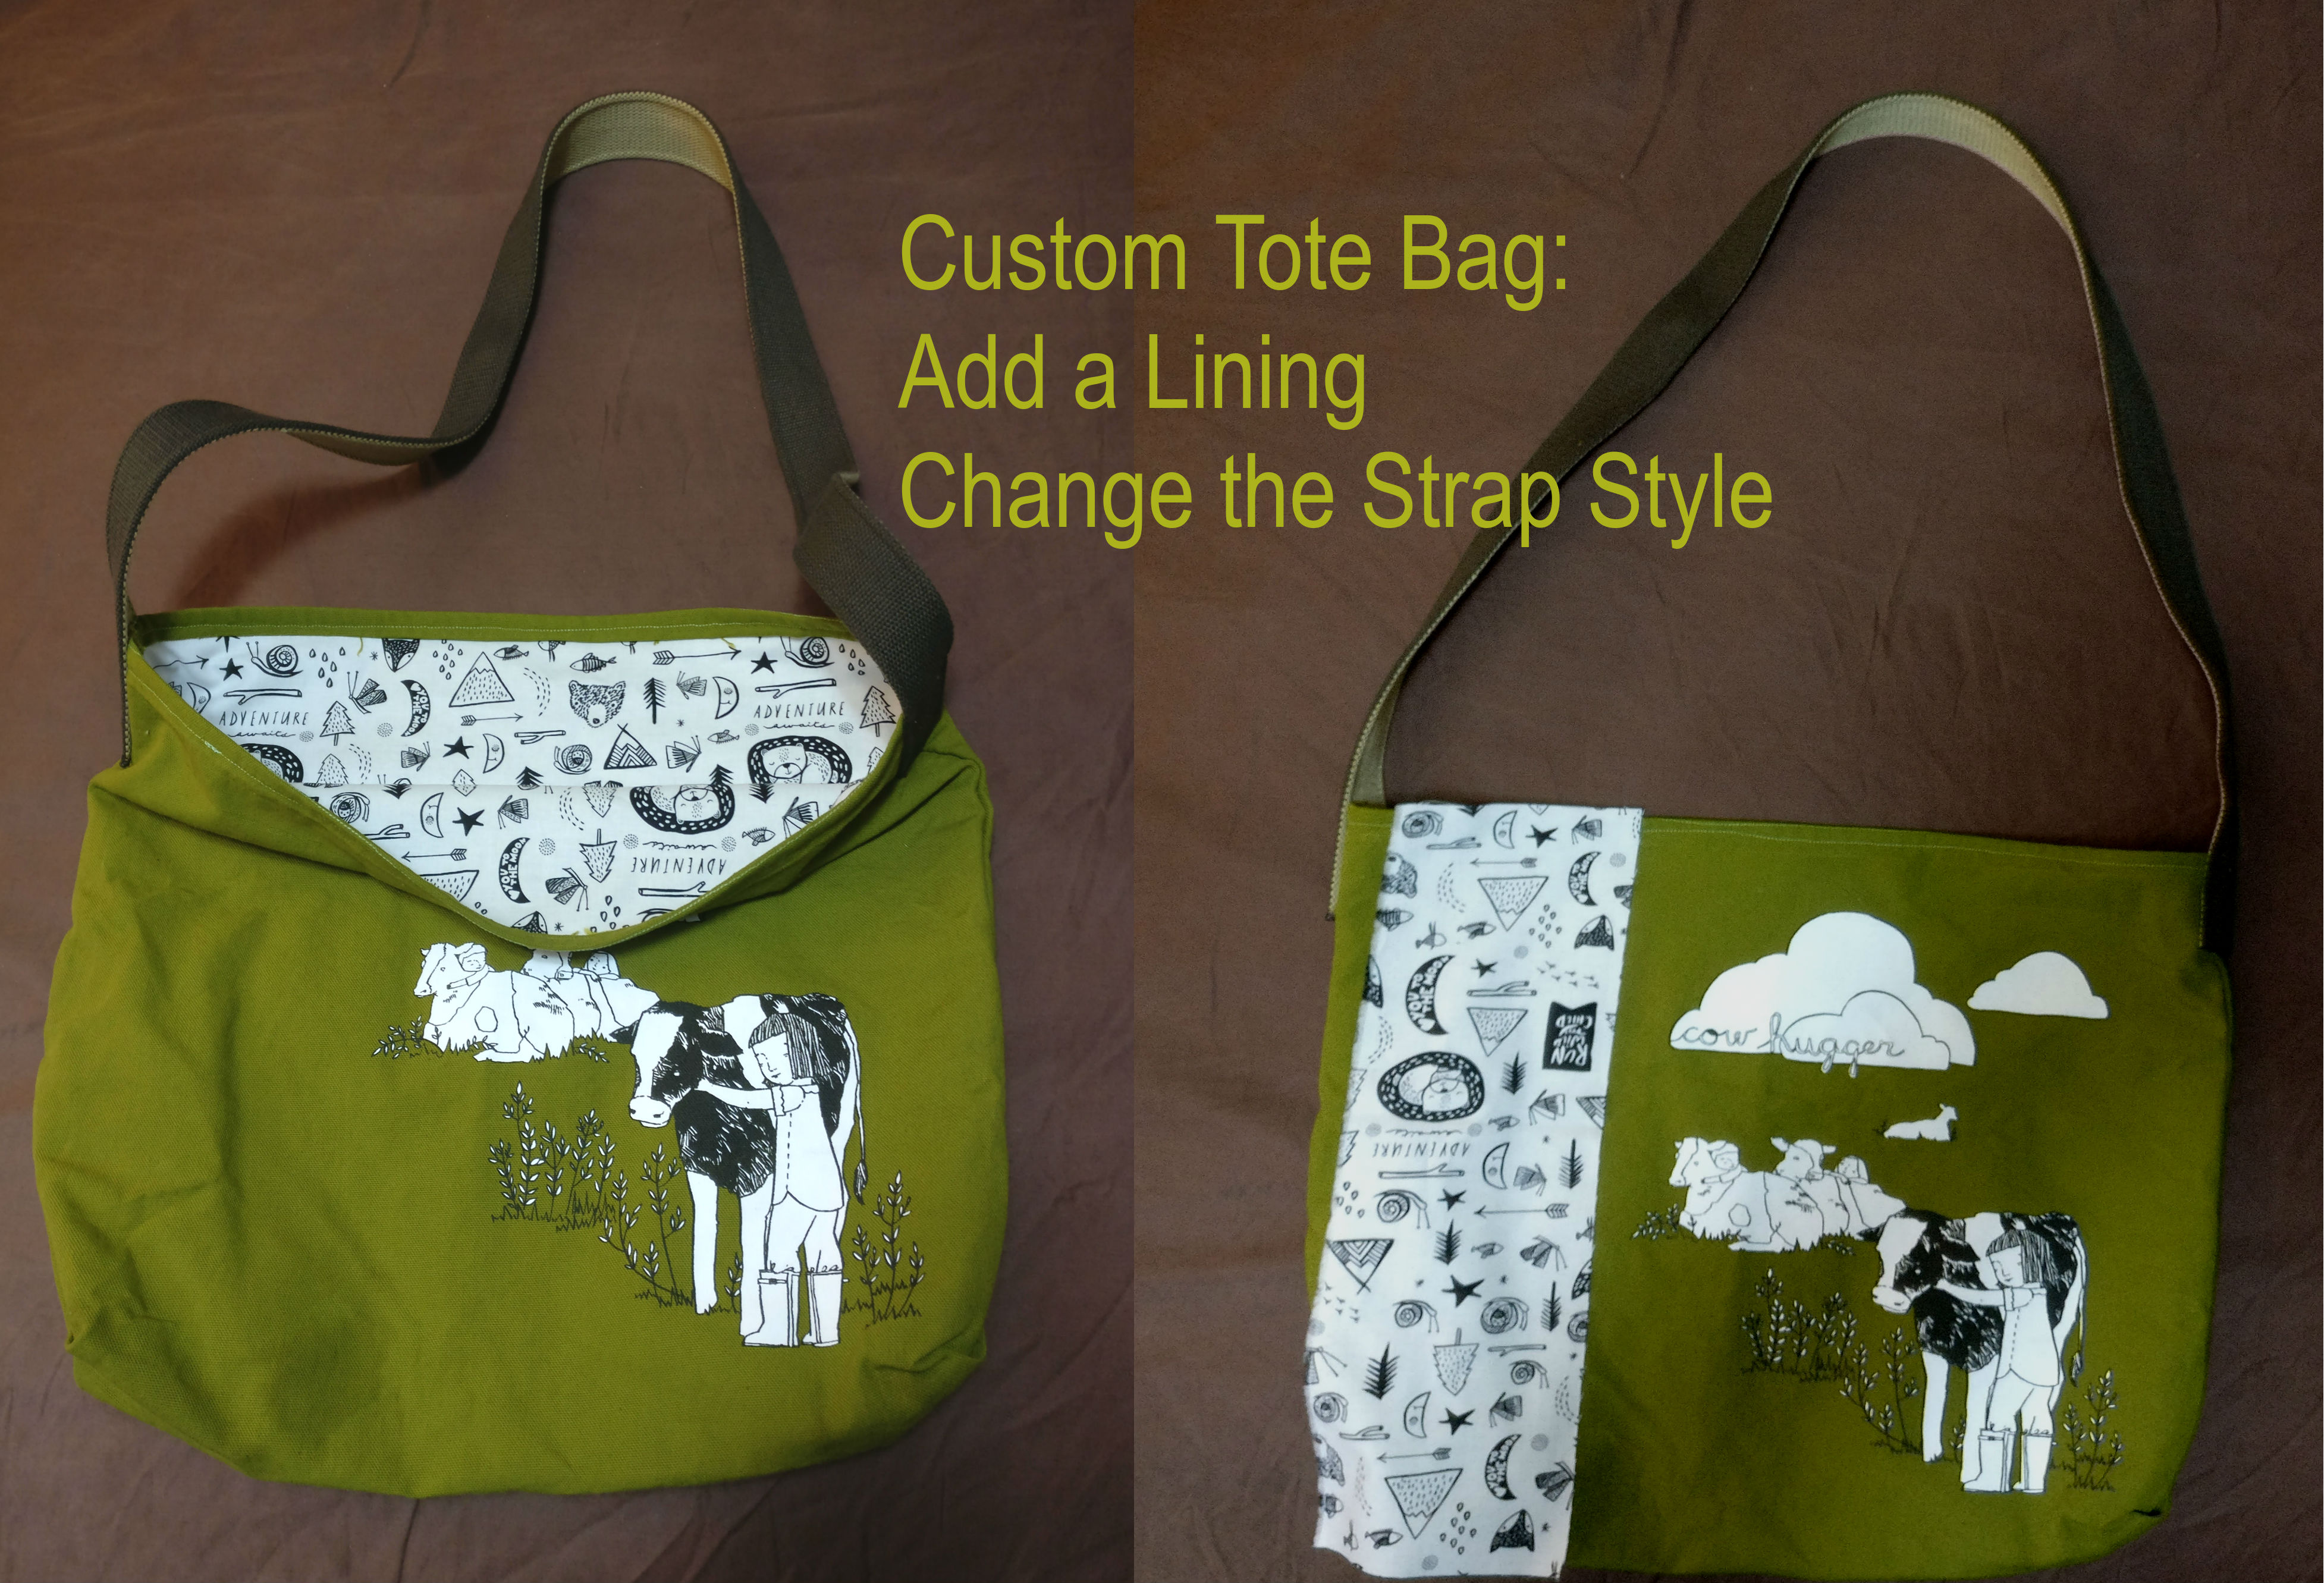 Herbivore "Cow Hugger" tote bag with adventure lining